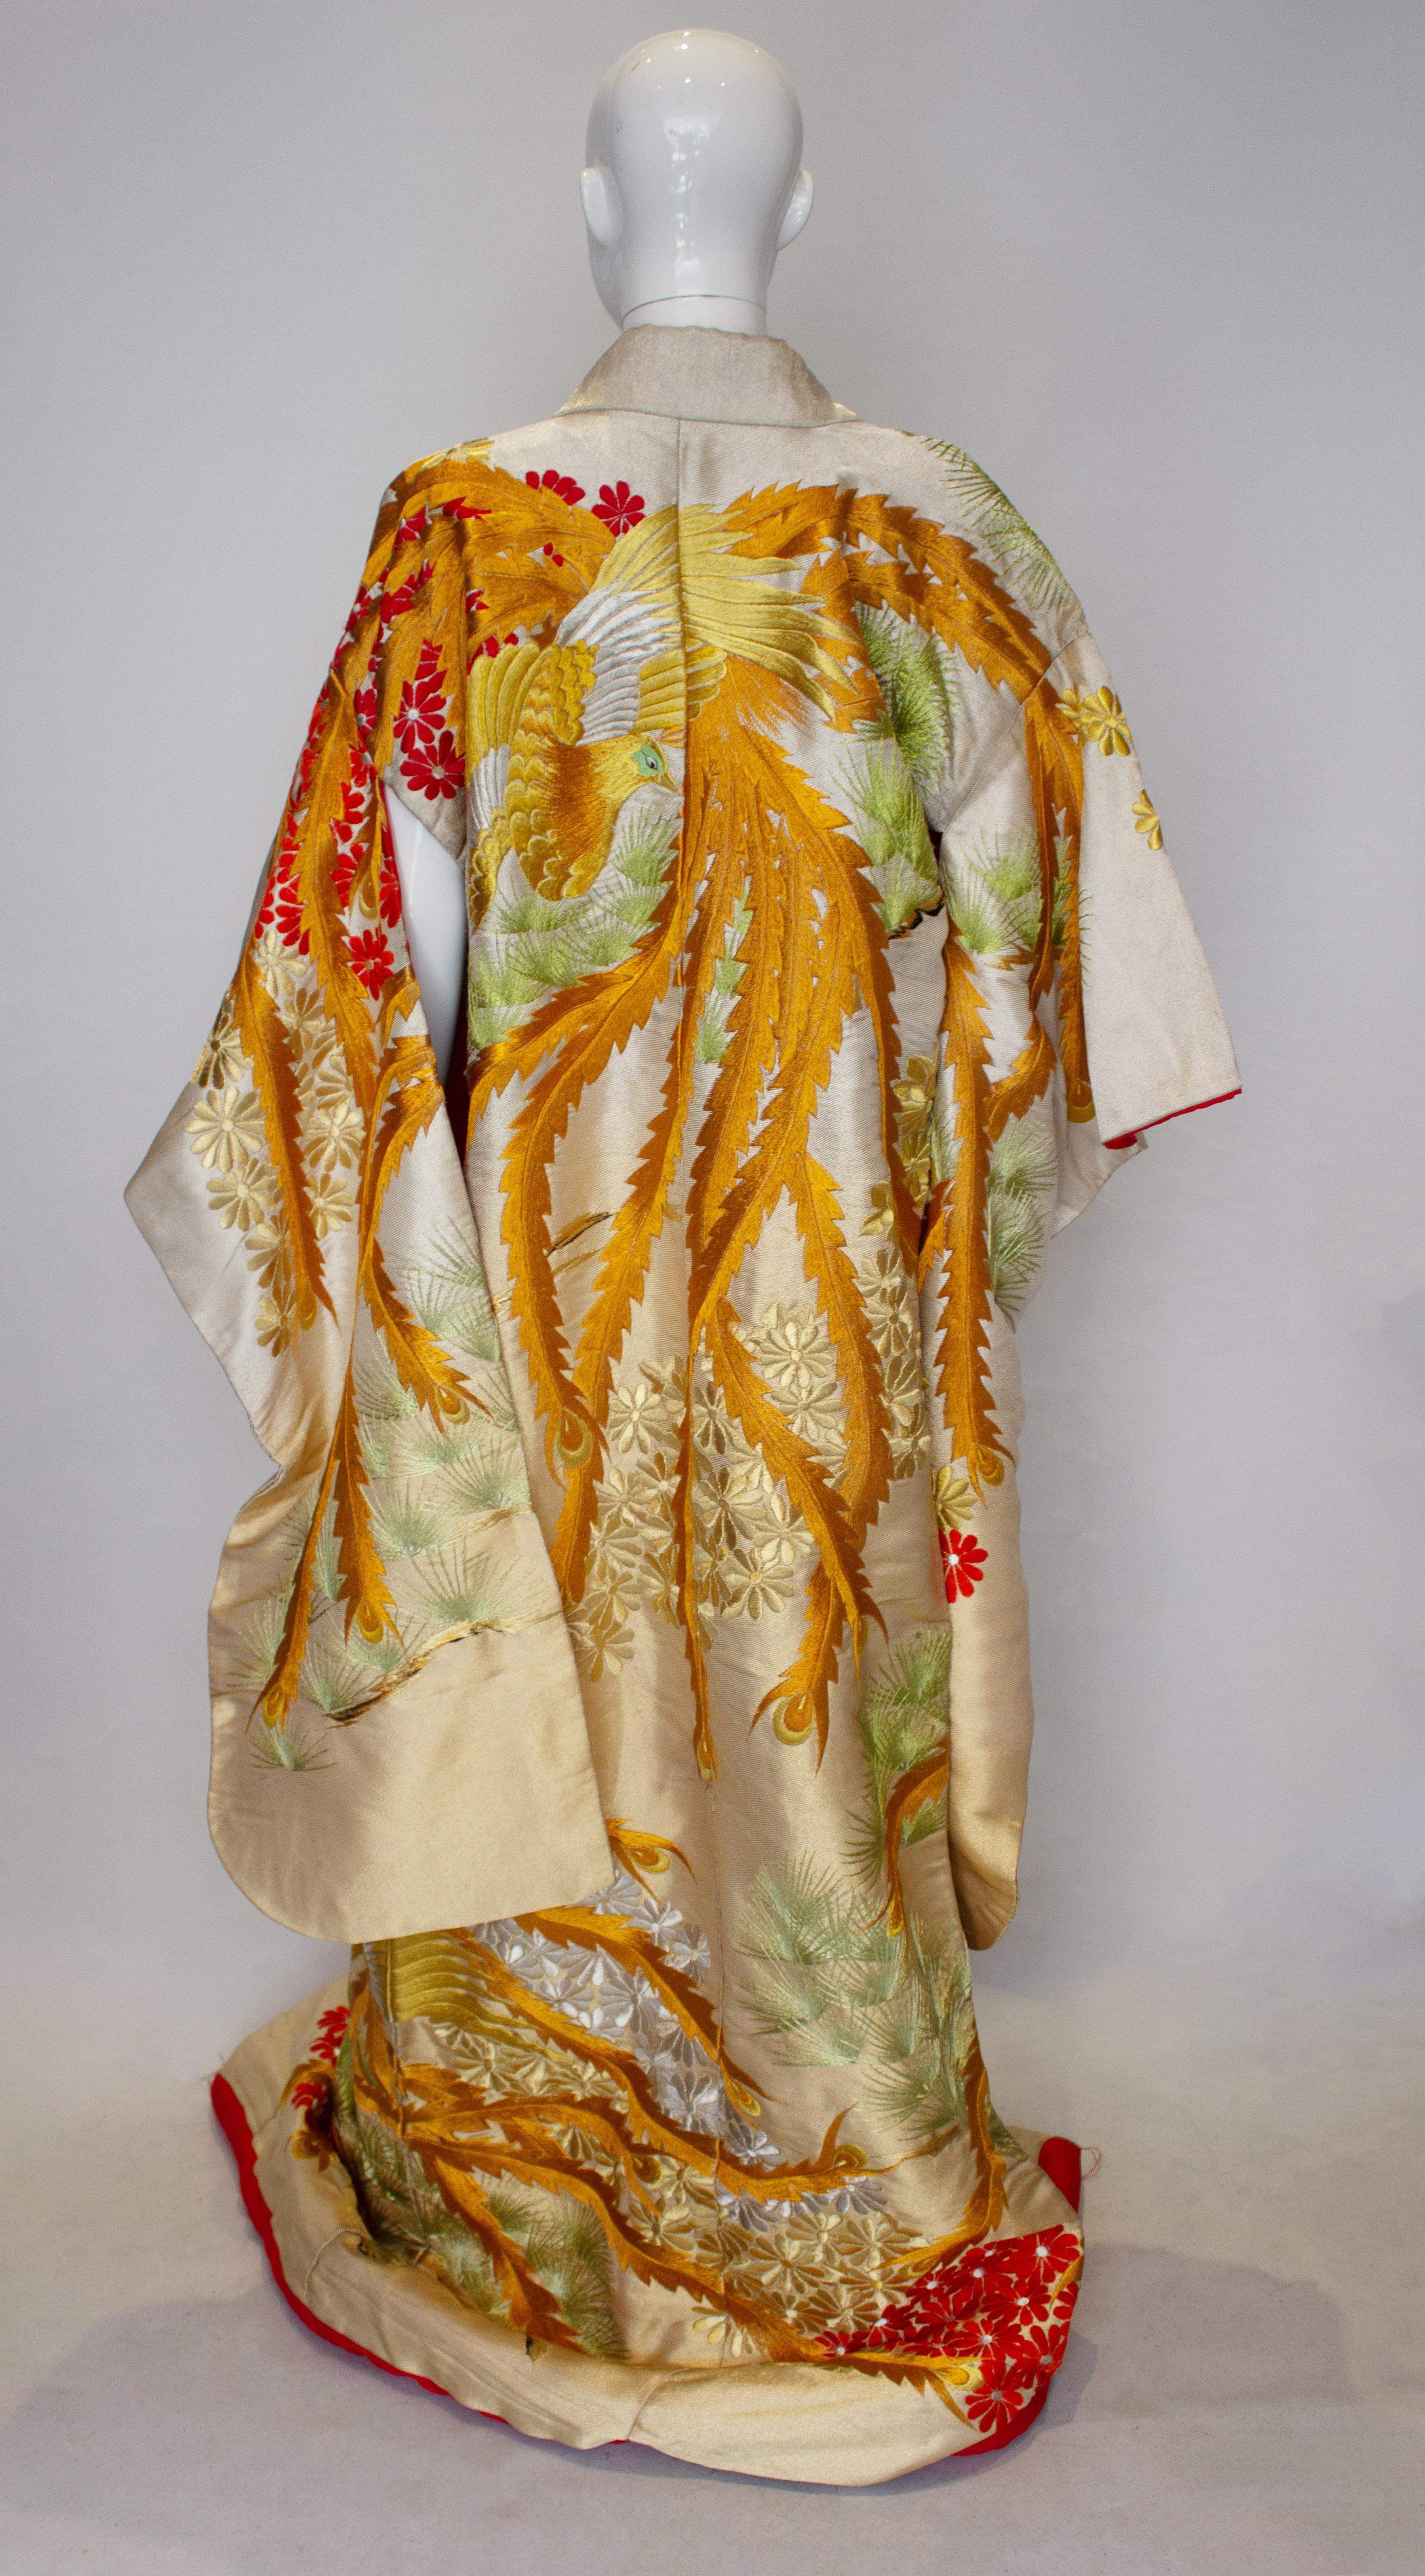 A rare gold and silver lame brocade wedding kimono dating from the 1960s. It is embroidered with the imperial phoenix . This bird represents fire , the sun, justice, obedience and fidelity .It is particularly associated with Kyoto as it is supposed